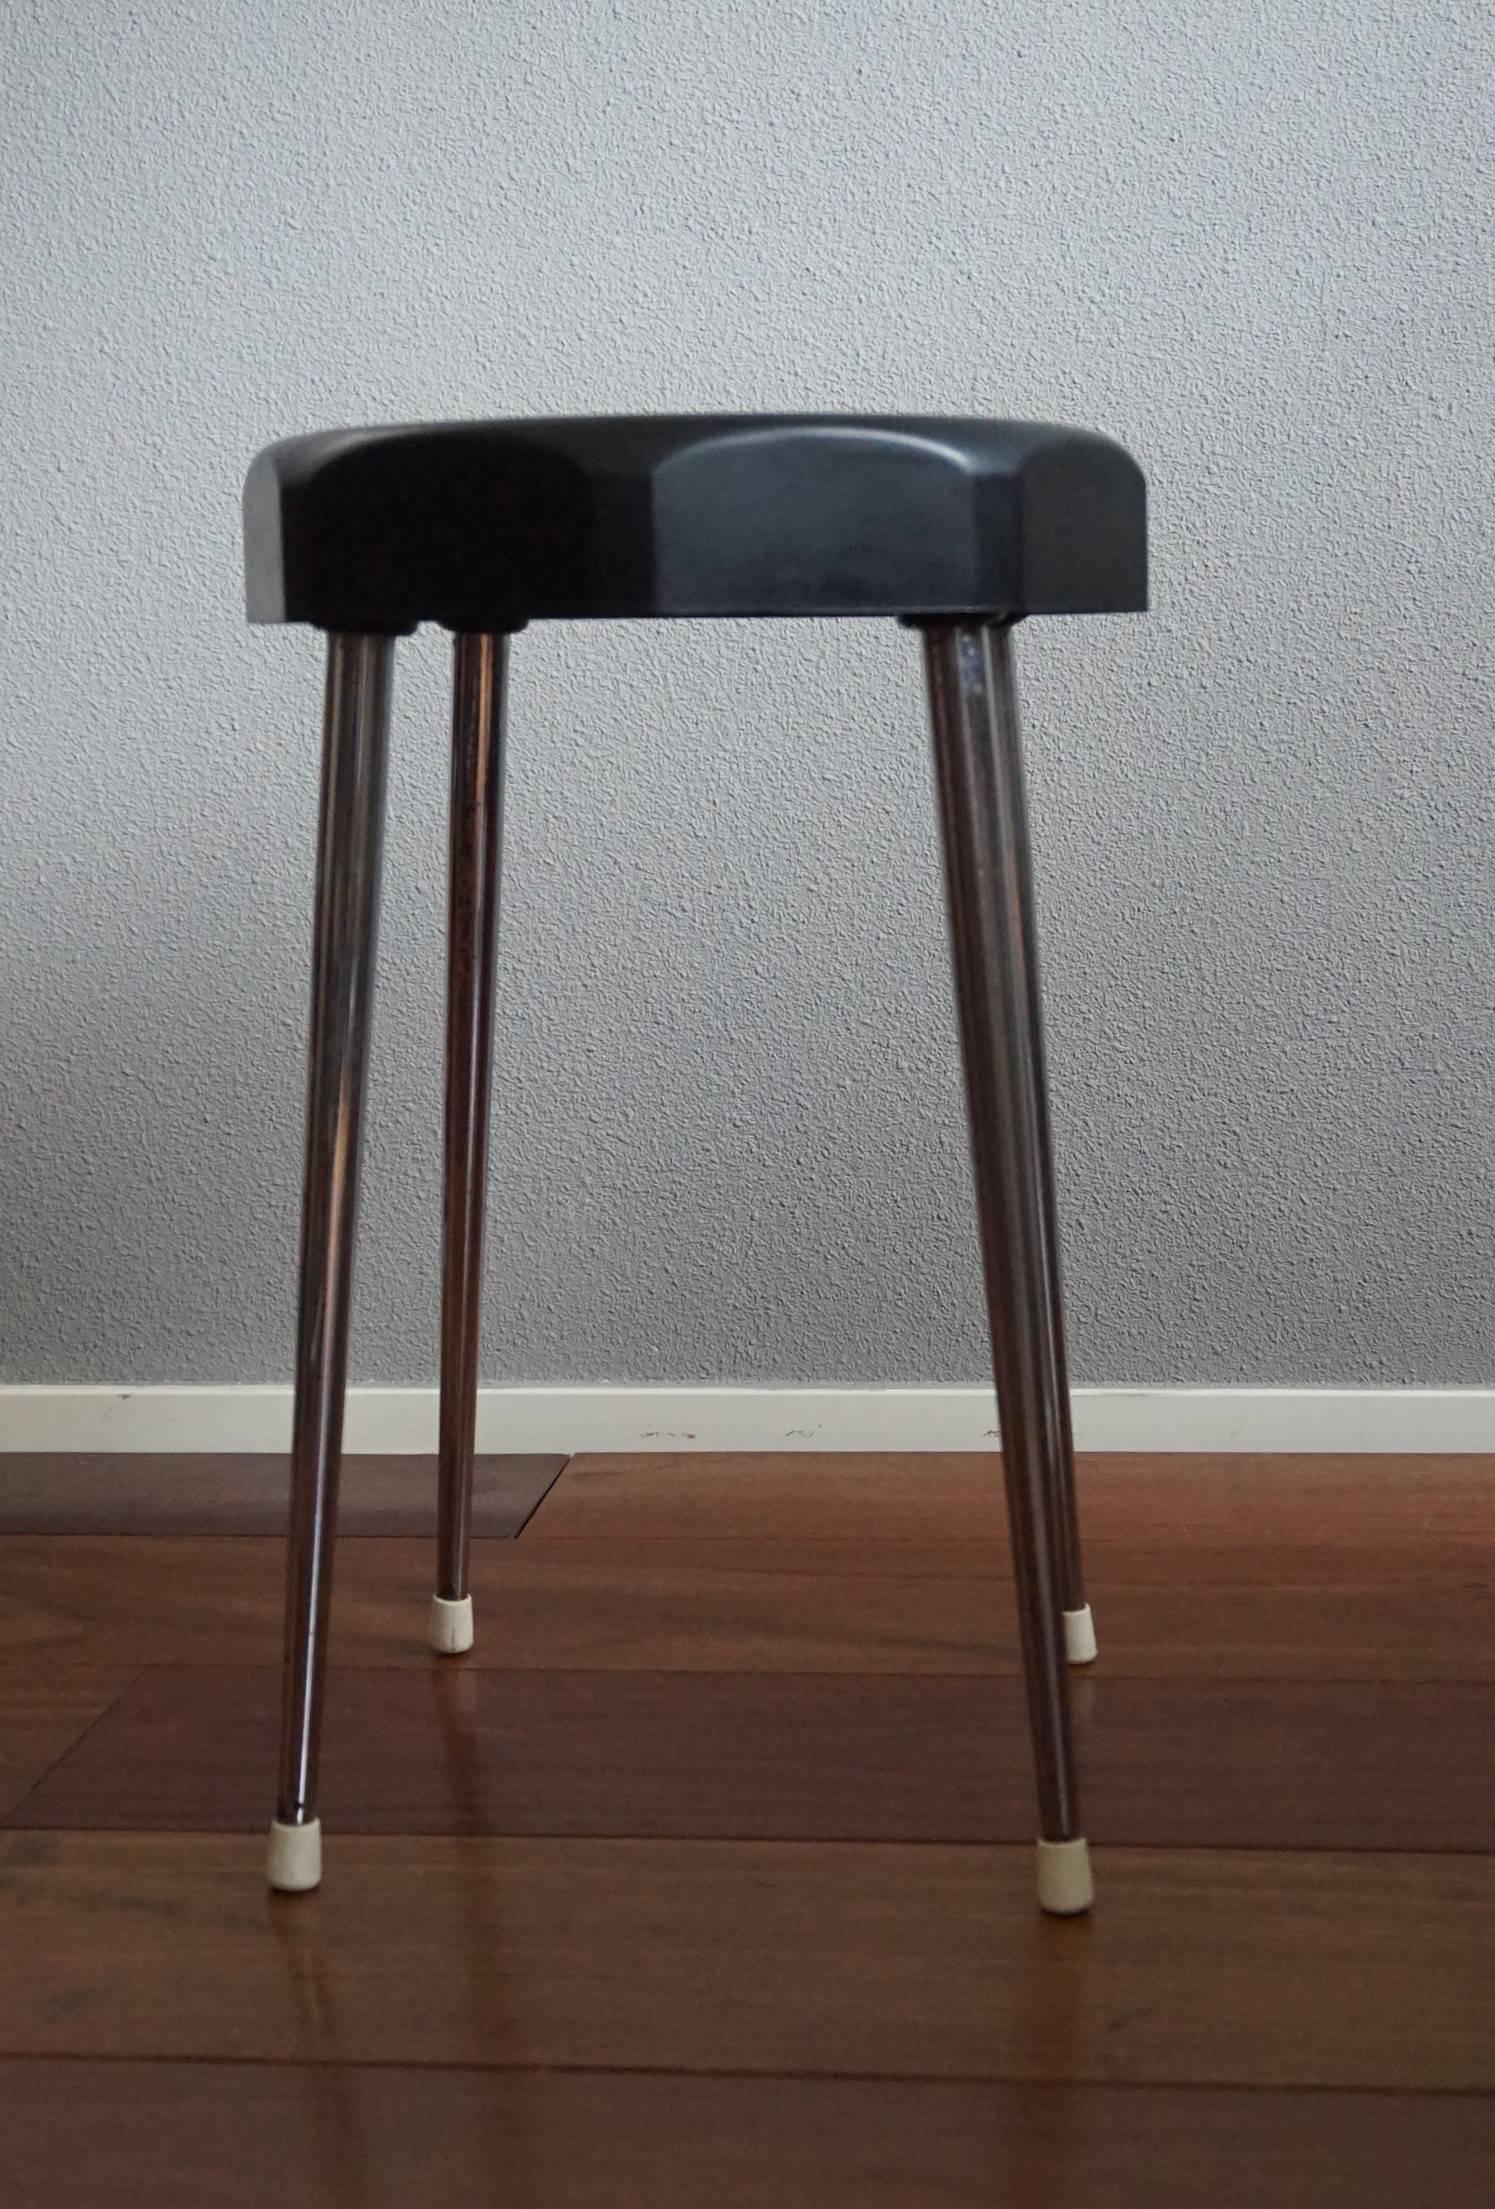 20th Century Midcentury Design Stool Chrome Legs and Bakelite Seat Great Shape and Condition